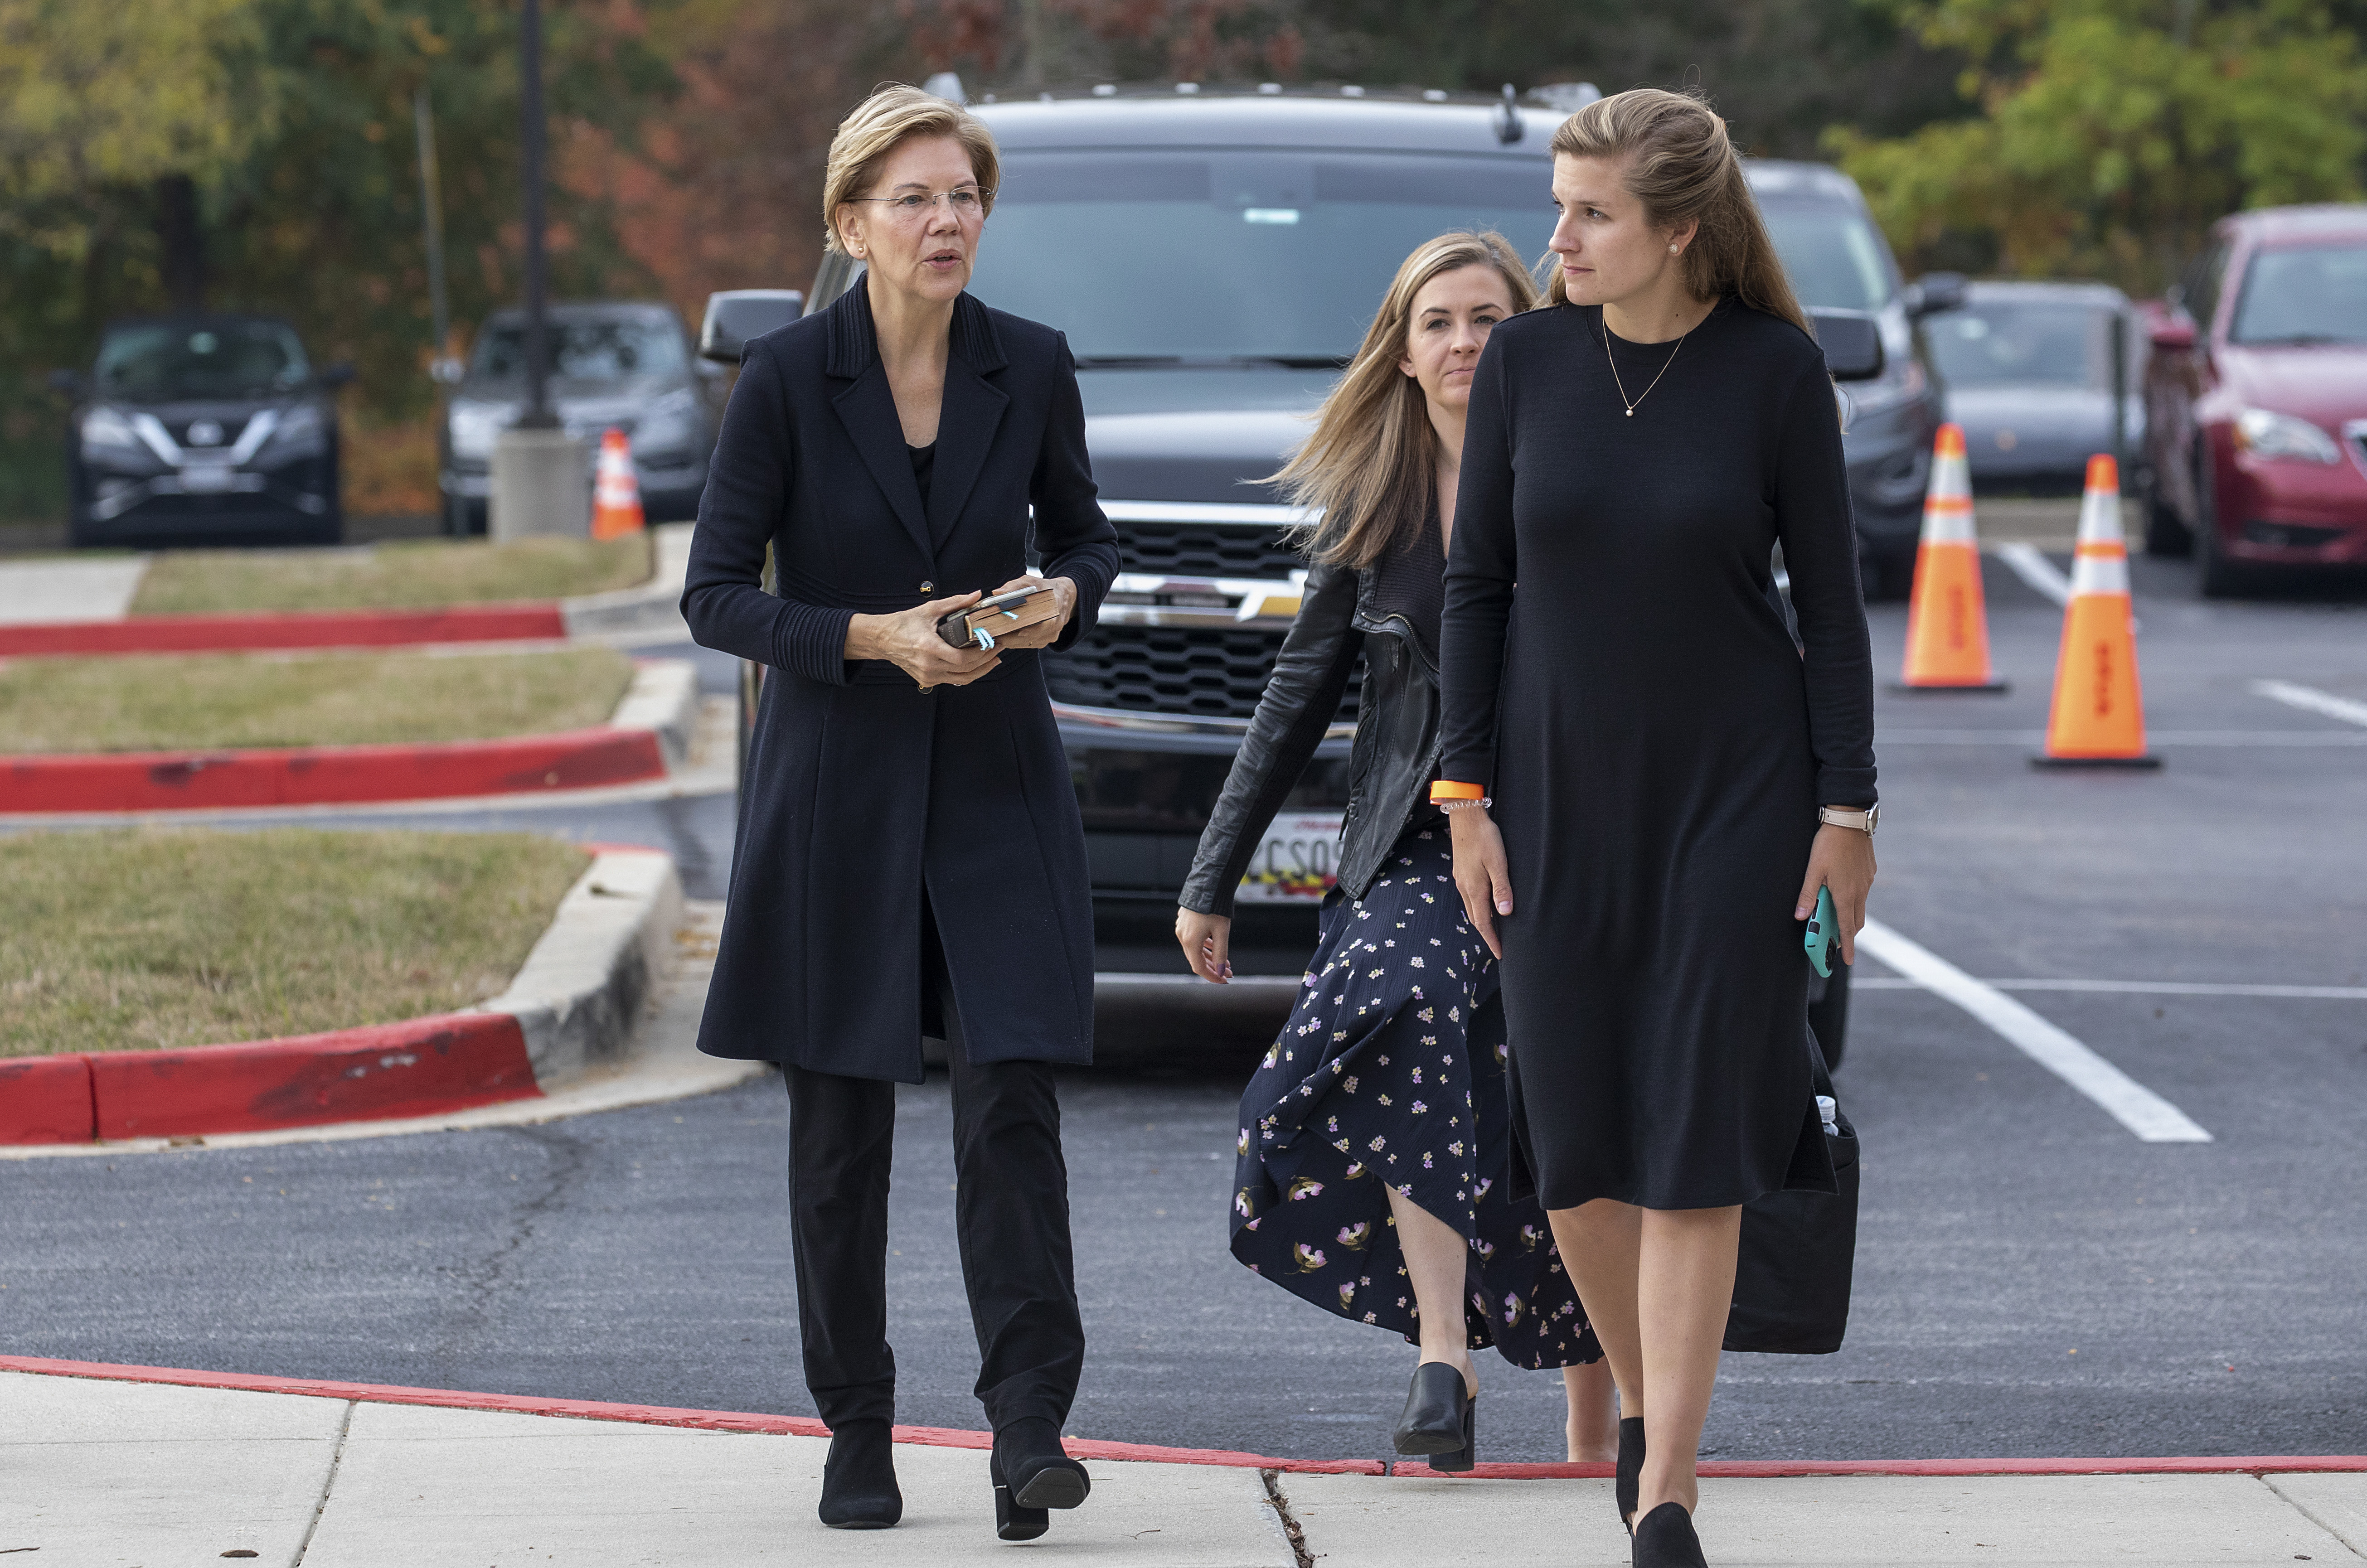 Democratic presidential candidate, Sen. Elizabeth Warren (D-MA) arrives for the funeral of Rep. Elijah Cummings at New Psalmist Baptist Church on October 25, 2019 in Baltimore, Maryland. A sharecropper’s son who rose to become a civil rights champion and the chairman of the powerful House Oversight and Government Reform Committee, Cummings died last week of complications from longstanding health problems. (Photo by Tasos Katopodis/Getty Images)